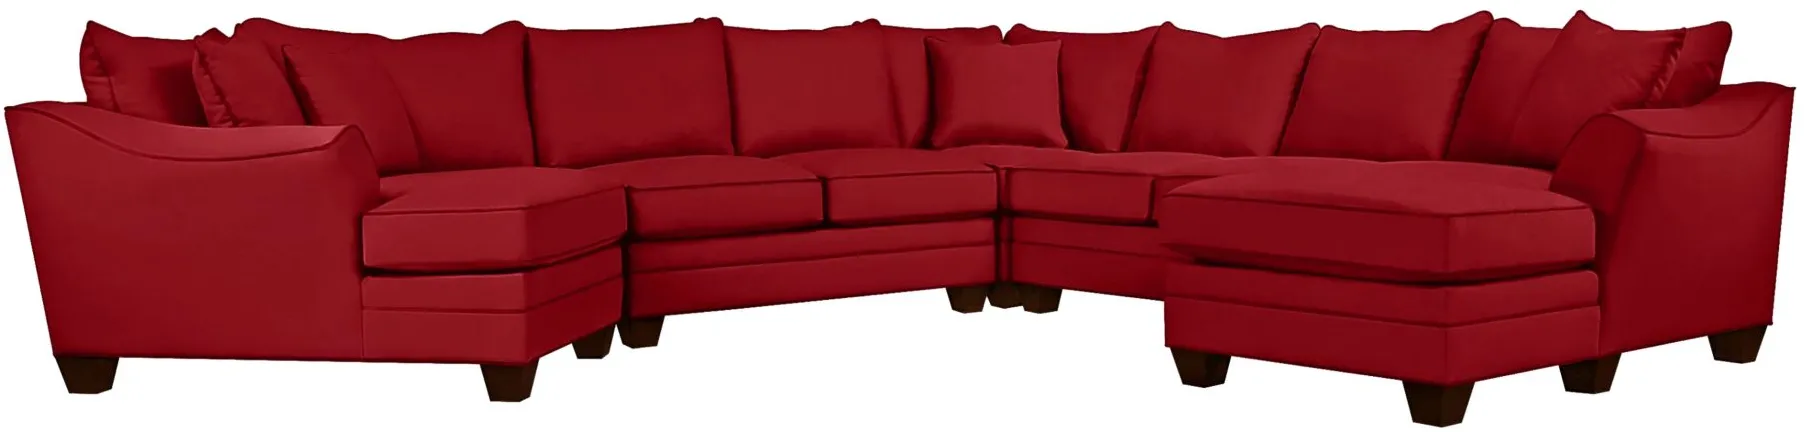 Foresthill 5-pc. Right Hand Facing Sectional Sofa in Suede So Soft Cardinal by H.M. Richards